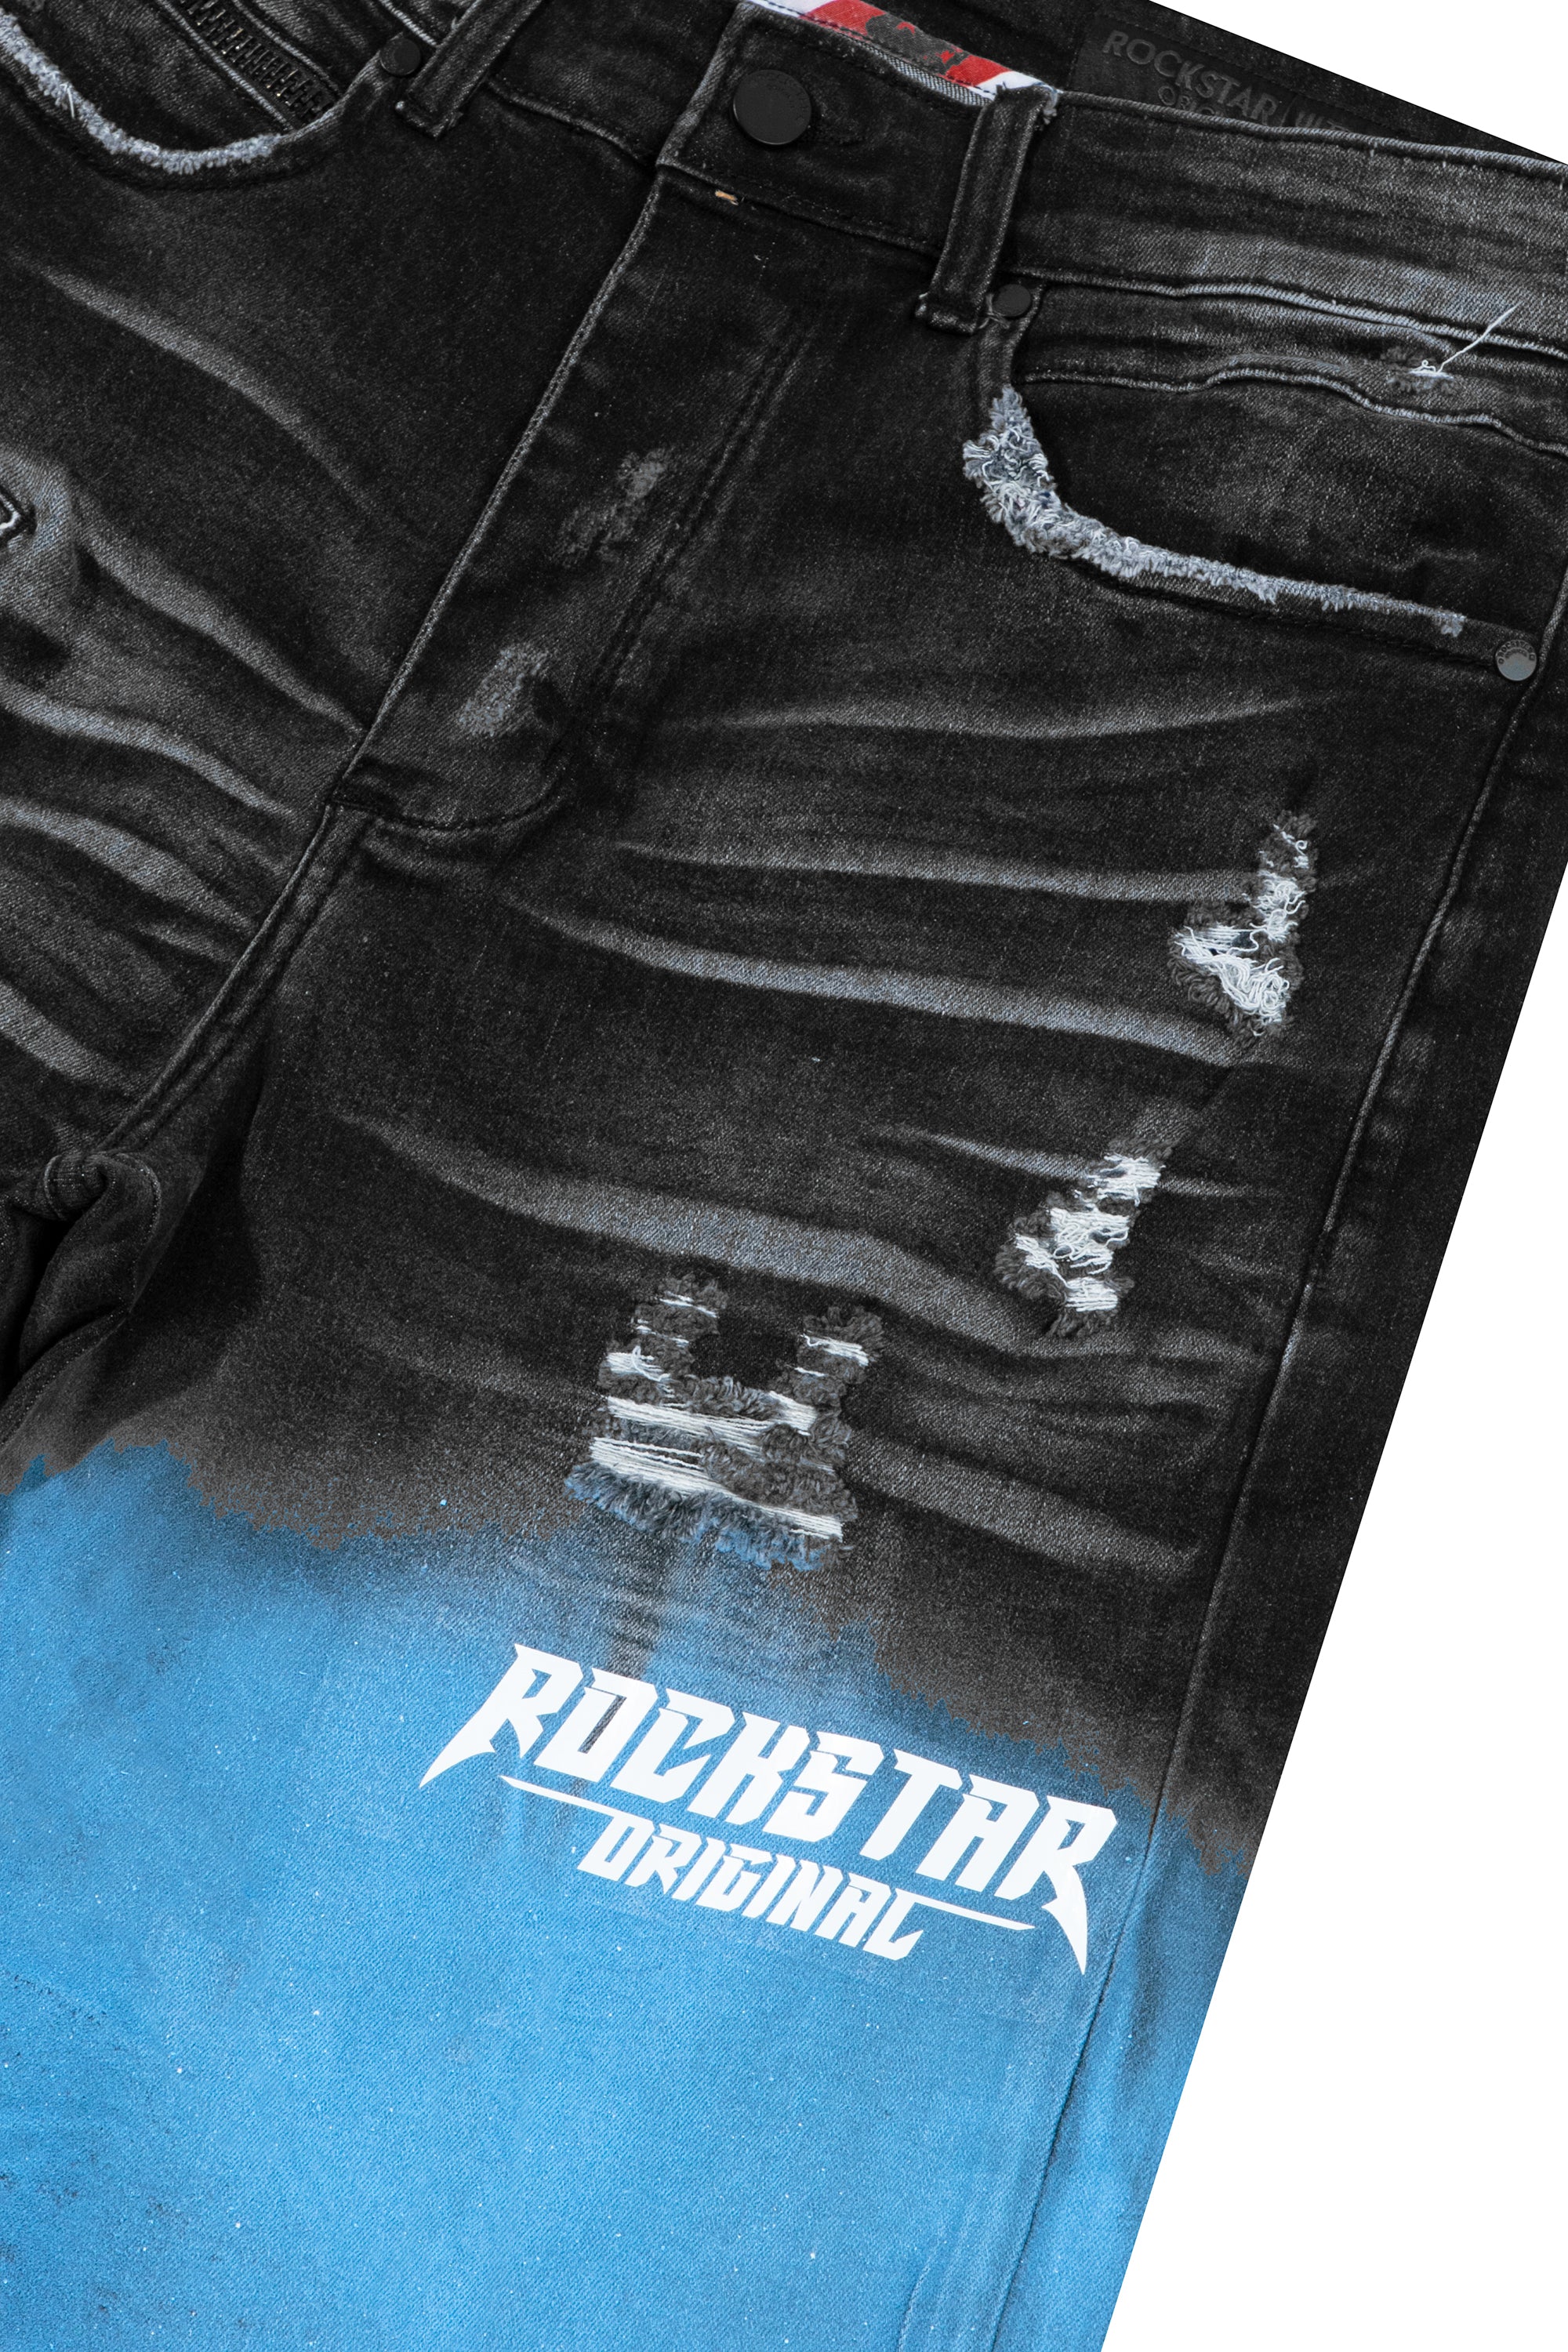 Rockstar Stack Pants In Black And Grey With DBF Puffer Logo. –  UNPRETENTIOUS AND COMPANY